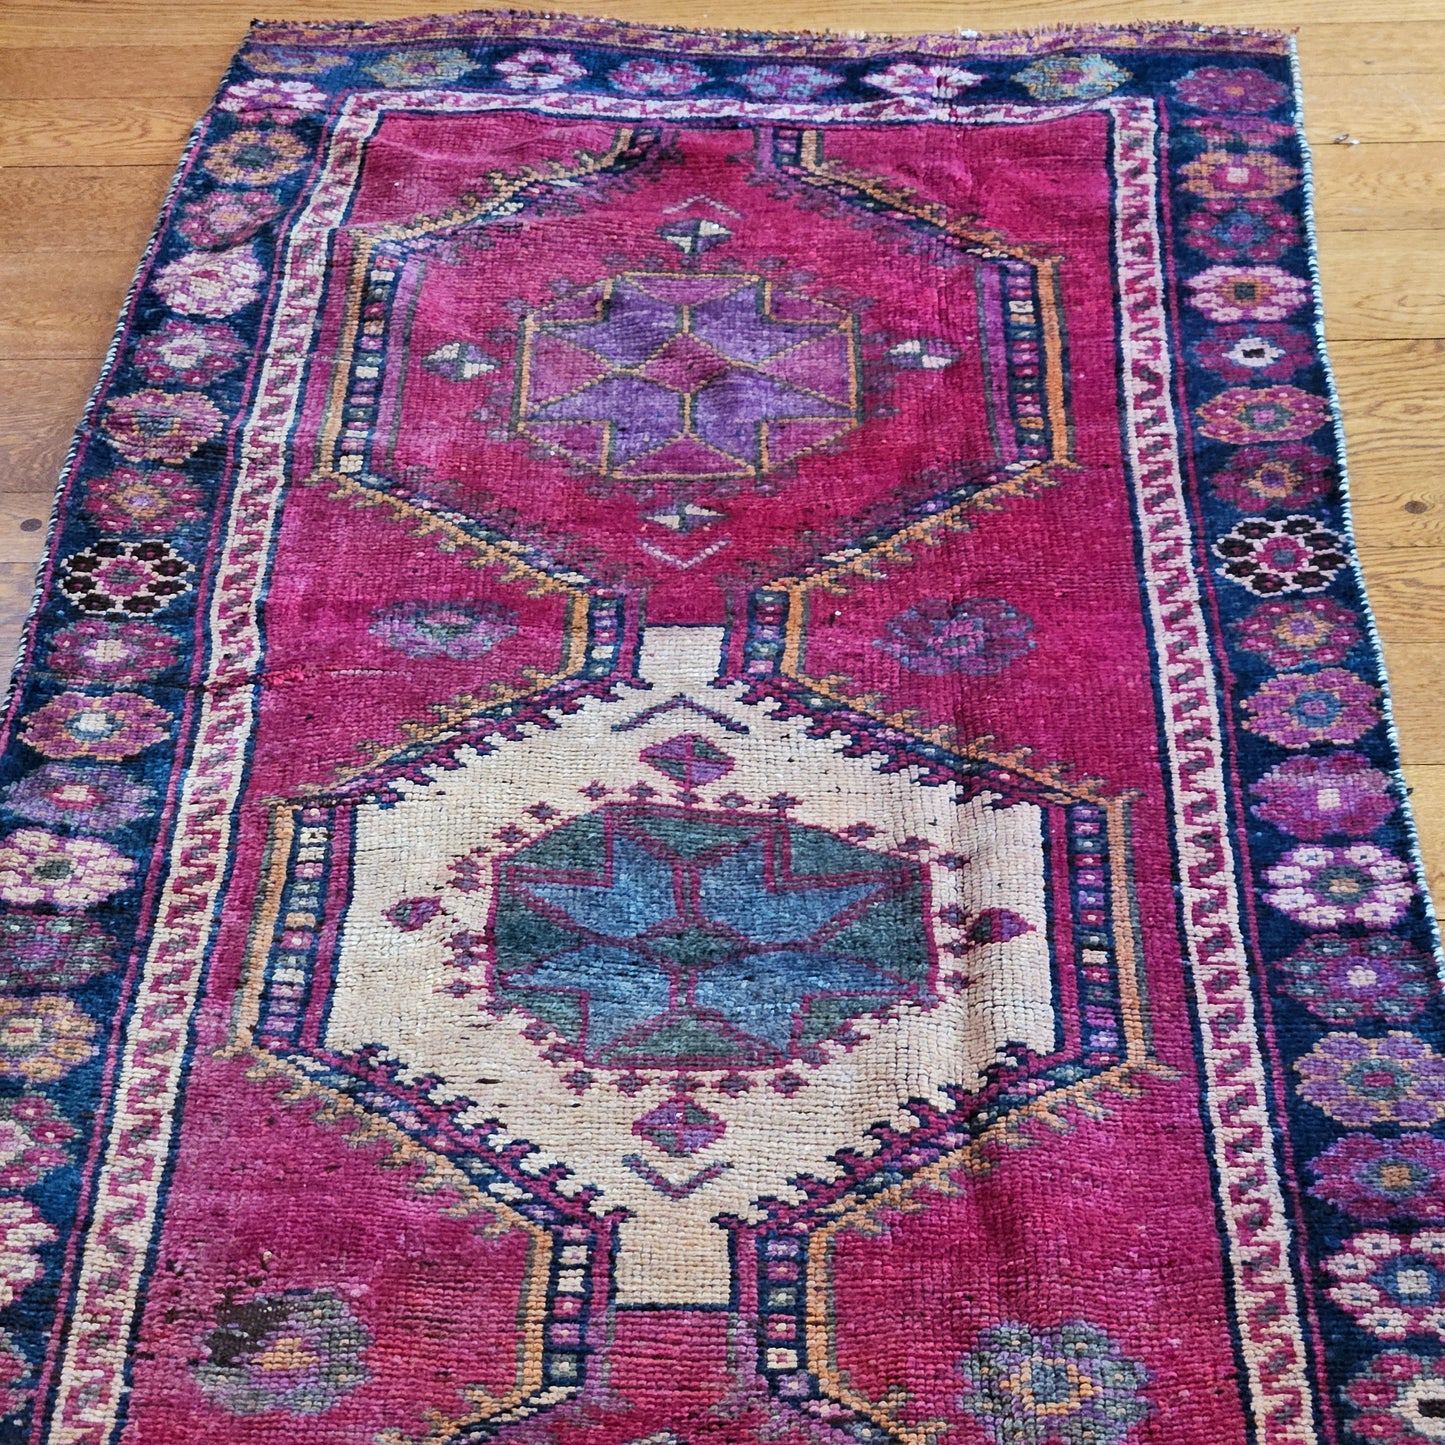 Vintage Hand Knotted Wool Carpet 3' 8" x 11' 2"